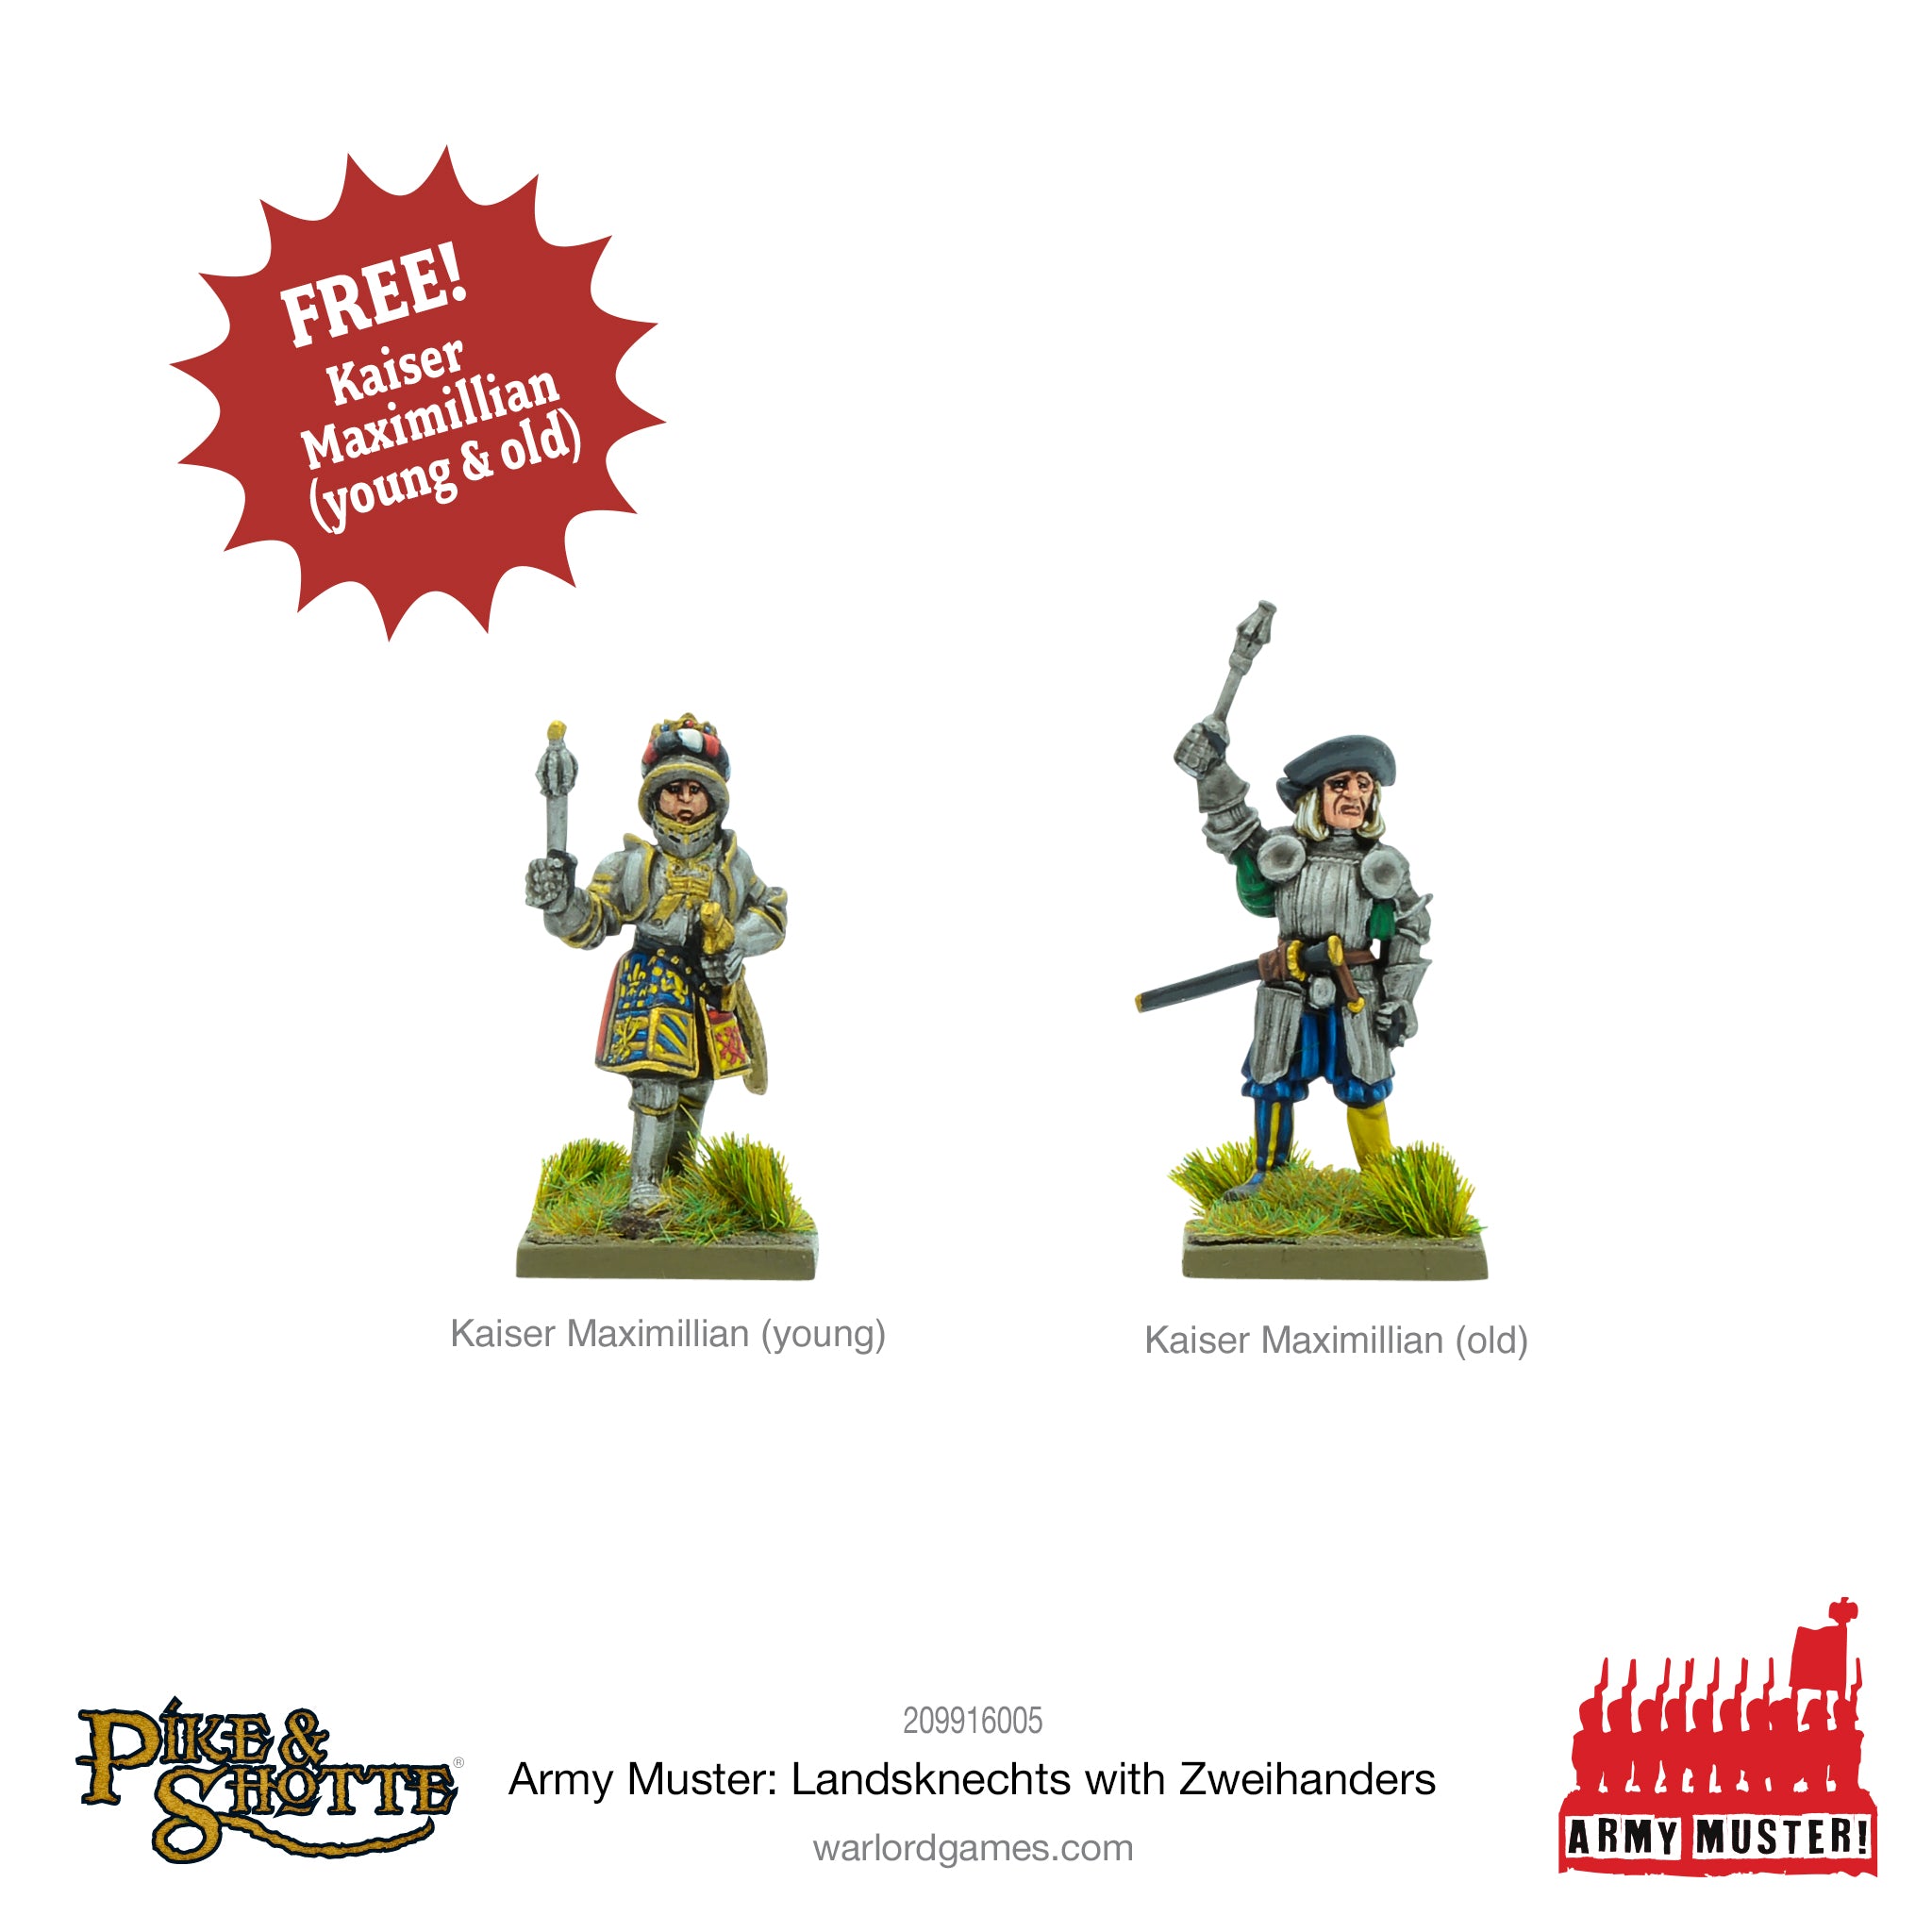 Army Muster - Landsknechts with Zweihanders